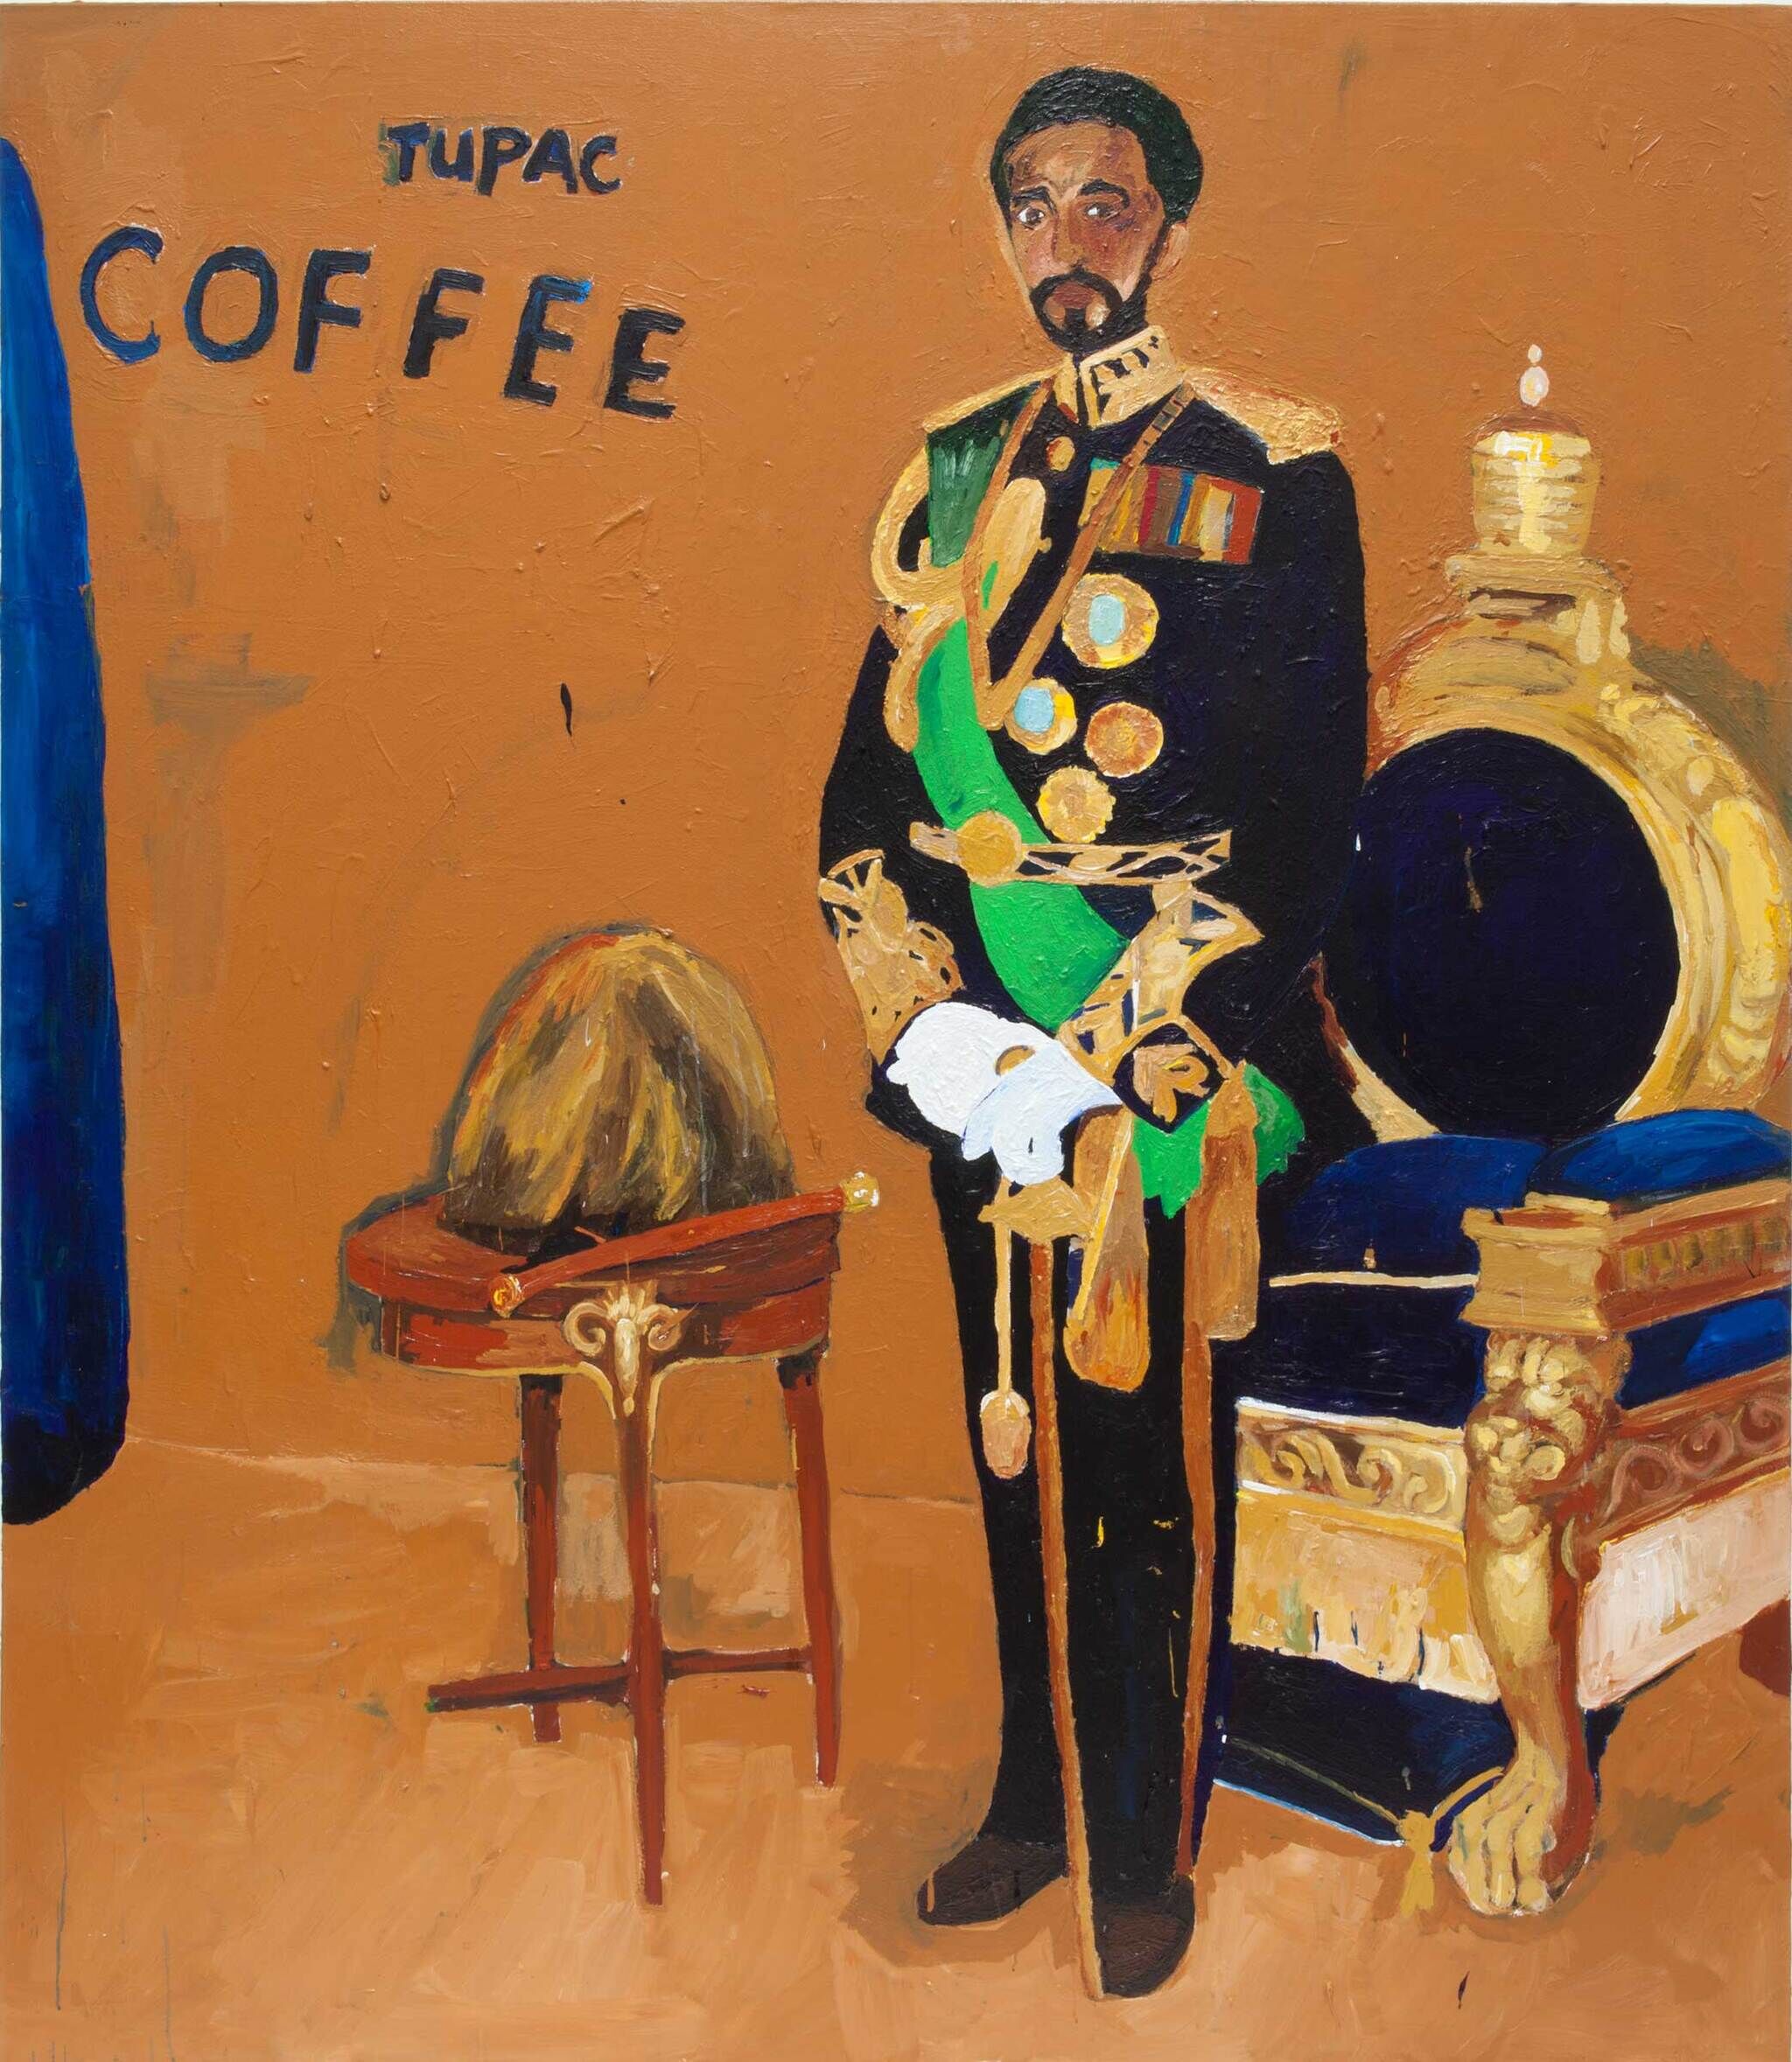 A Black man stands to the center-left, dressed in regal attire. His black suit and pants are heavily decorated with gold medals and embellishments, and a bright green sash hangs across his torso. Behind him is a throne and beside him, to the left, is a wooden end table. The background is an orange-brown color, and in the top right corner of the painting, the words "TUPAC COFFEE" are written in blue letters.